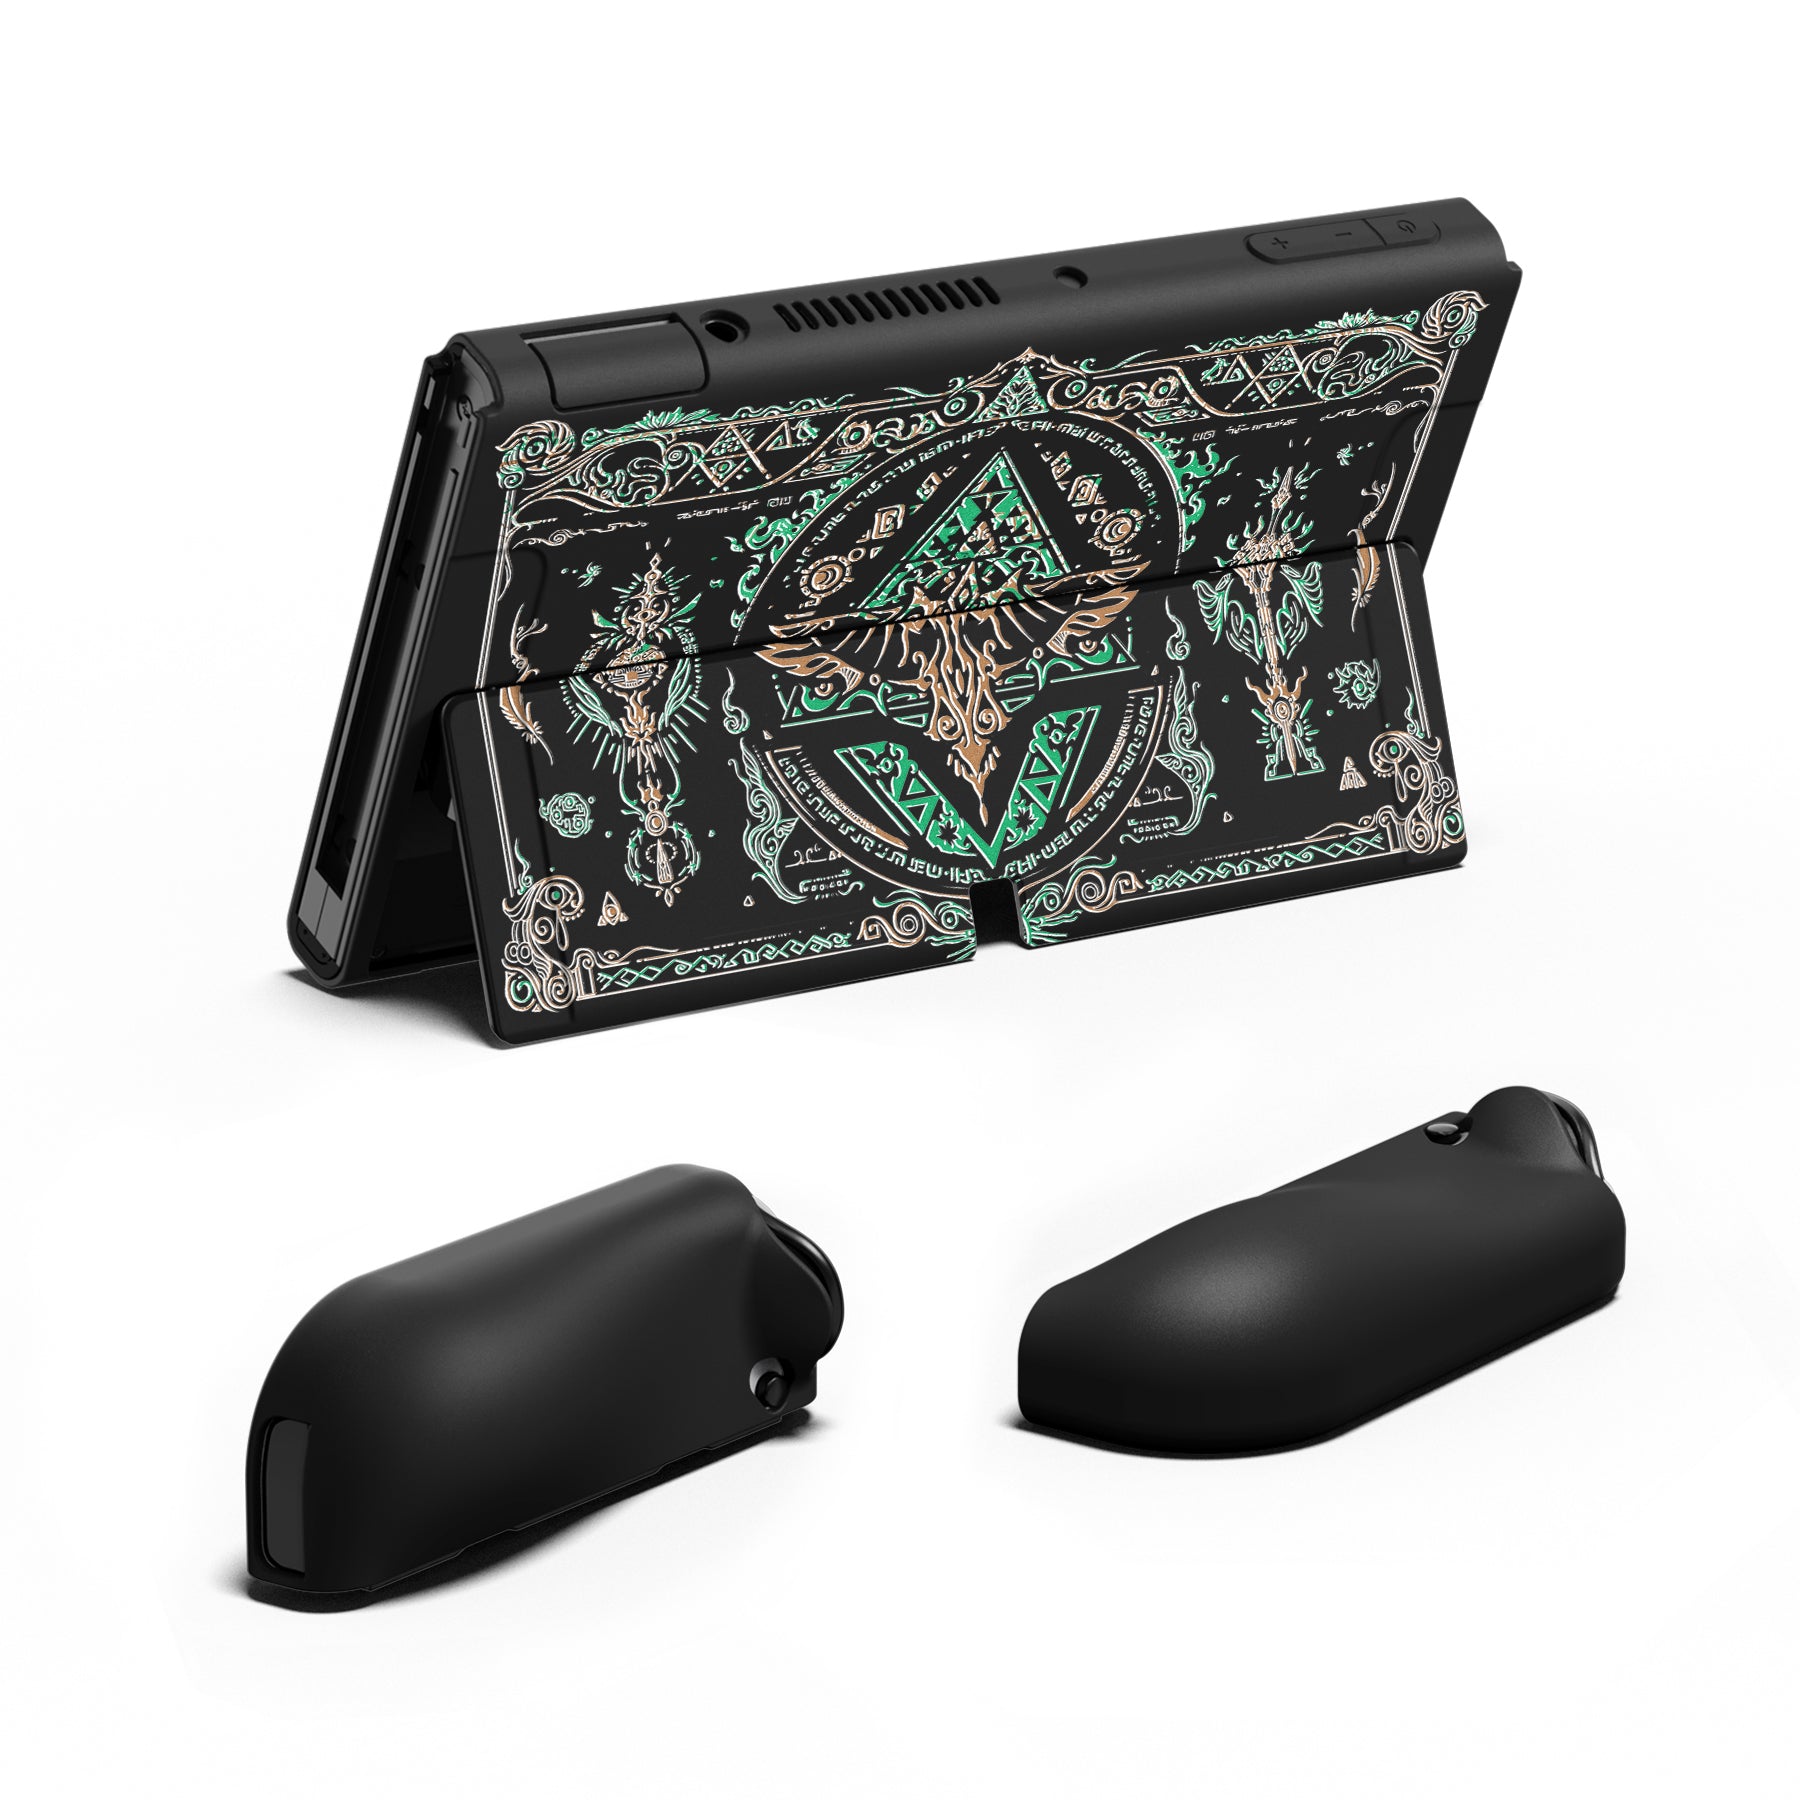 PlayVital ZealProtect Soft Protective Case for Switch OLED, Flexible Protector Joycon Grip Cover for Switch OLED with Thumb Grip Caps & ABXY Direction Button Caps - Totem of Kingdom -XSOYV6028 playvital